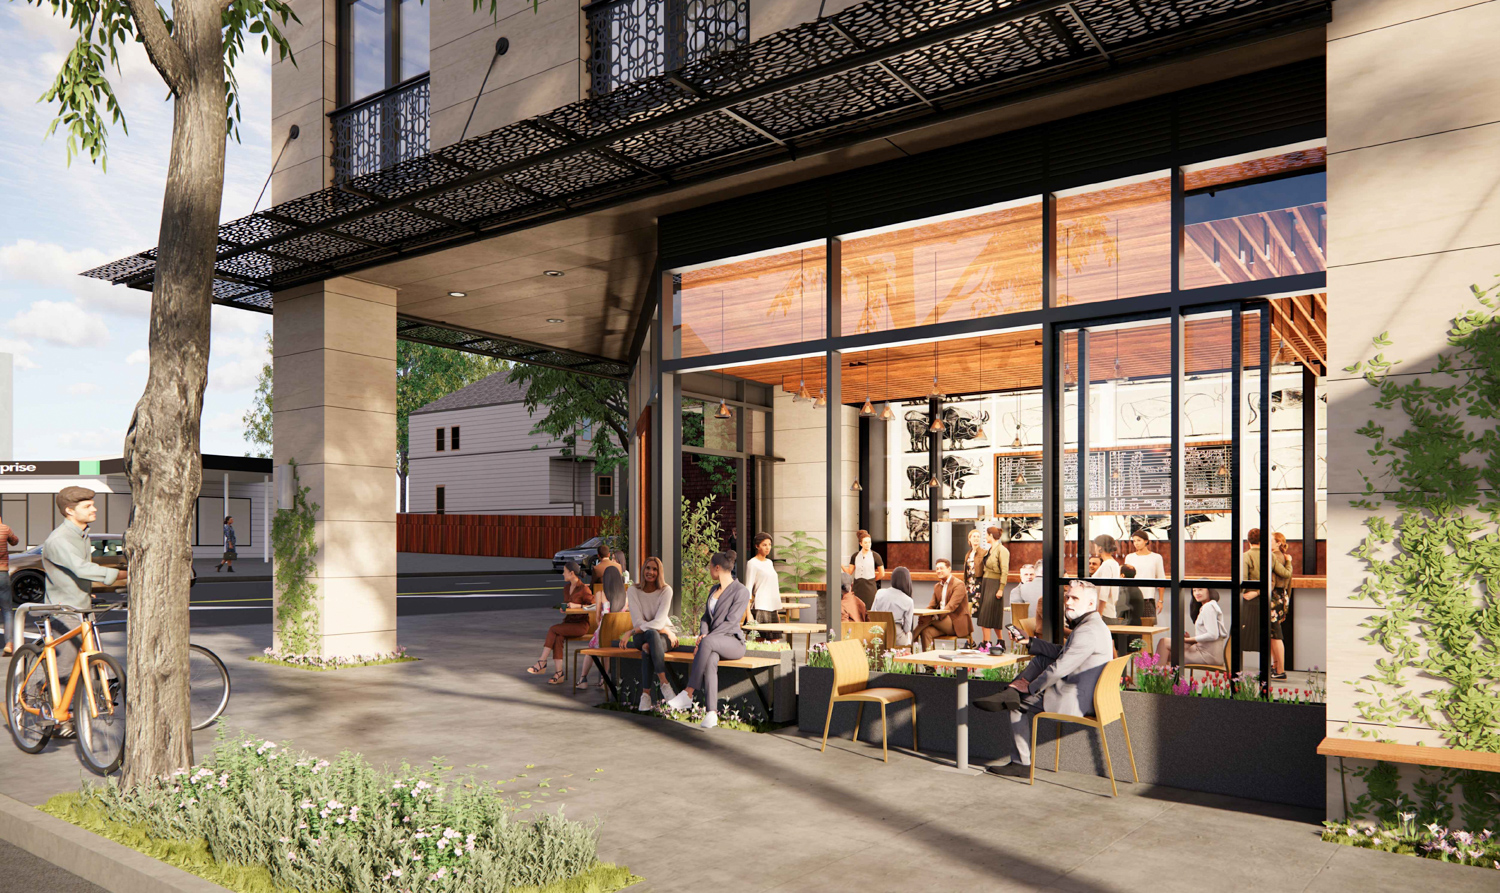 3000 Shattuck Avenue commercial retail space, rendering by Trachtenberg Architects